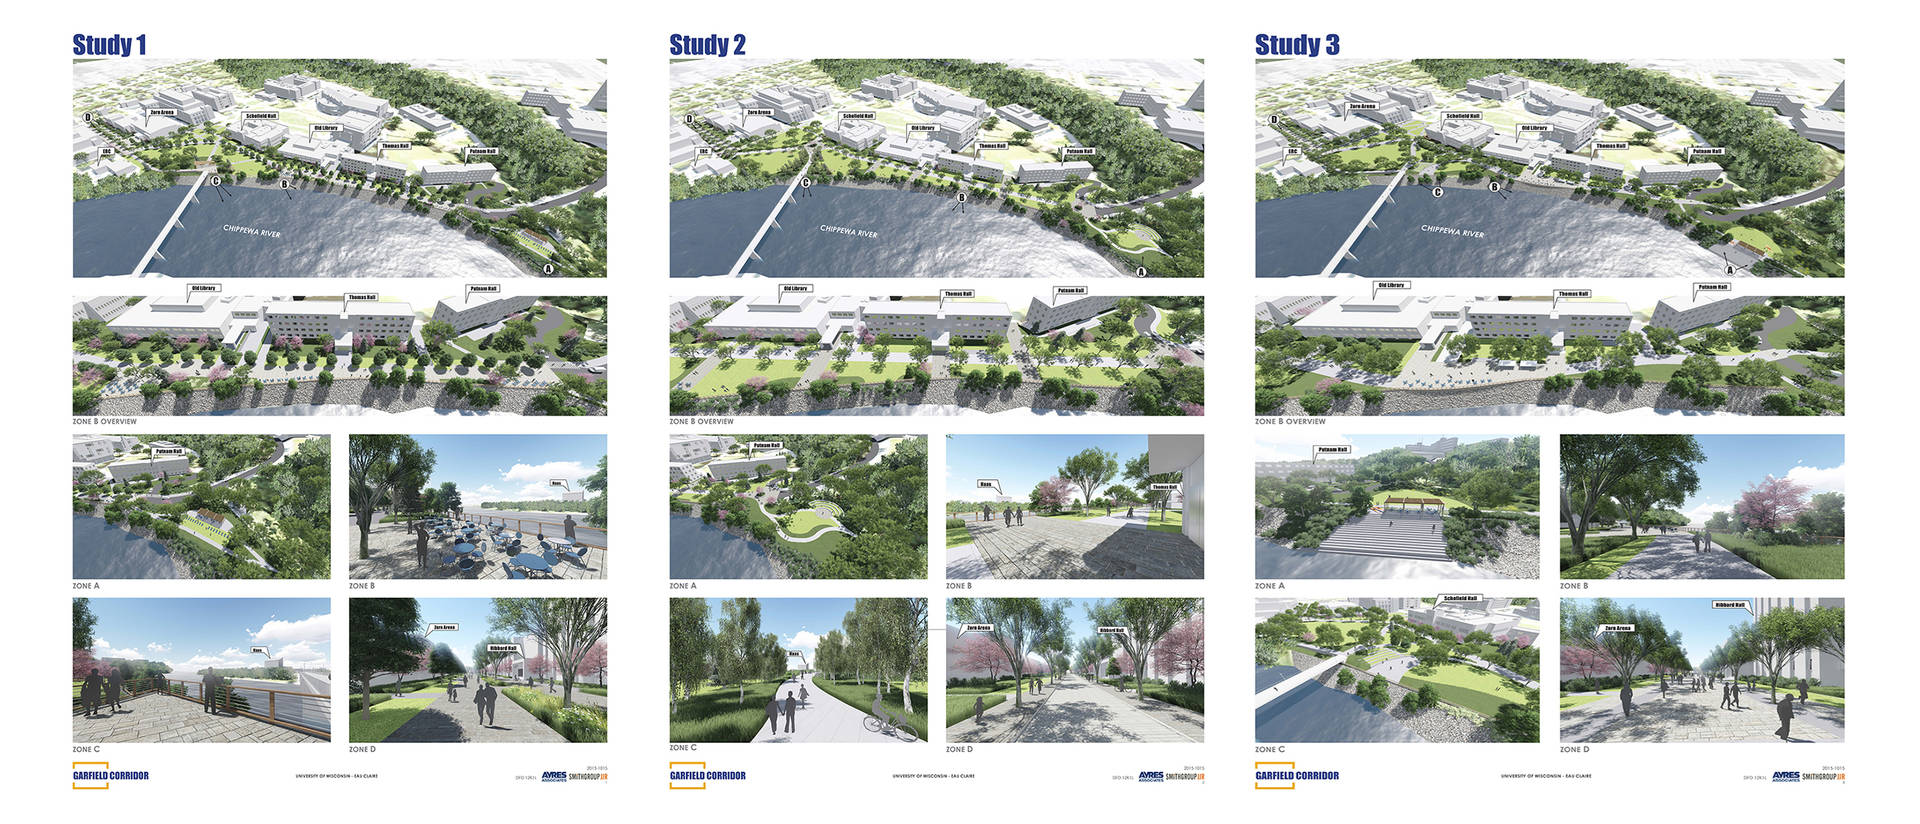 Garfield Ave project studies 1-3